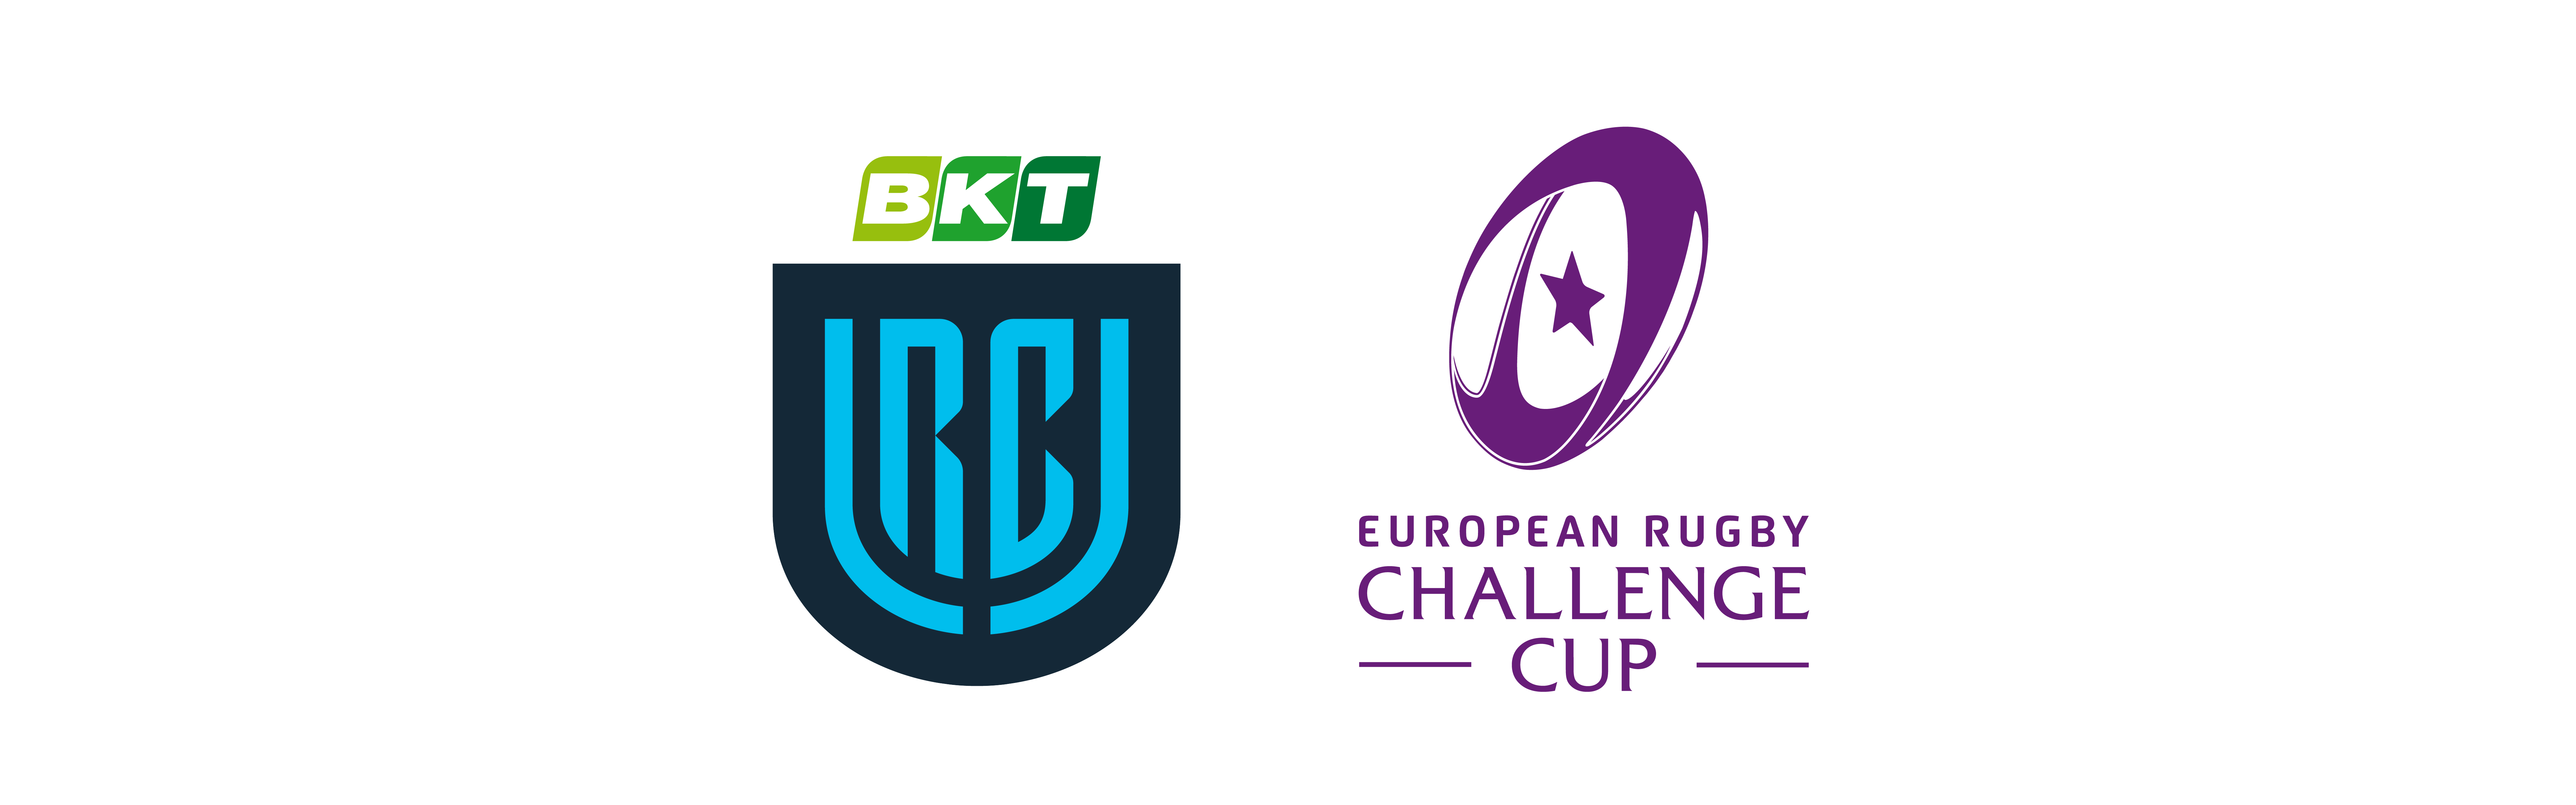 URC & Challenge Cup logos side by side